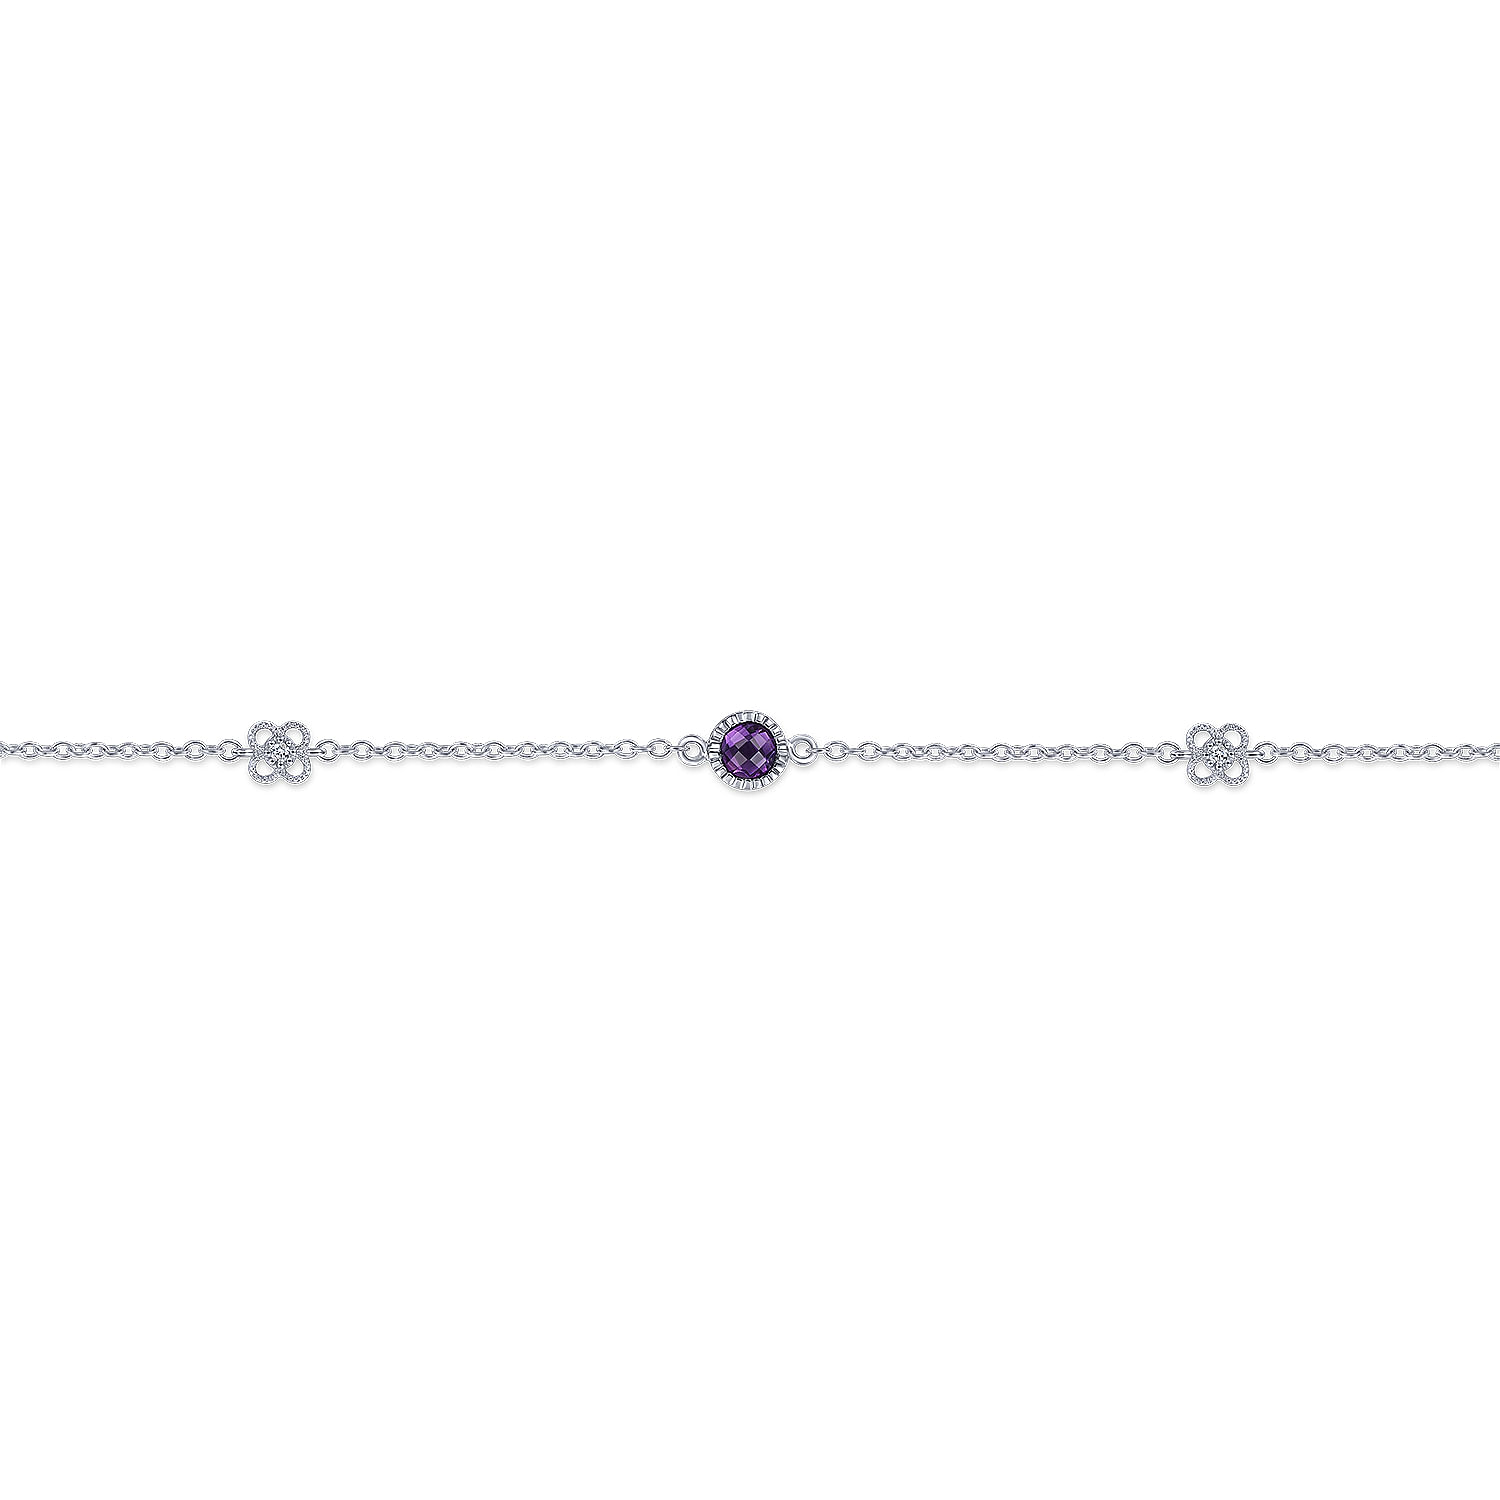 Sterling Silver Chain Ankle Bracelet with Amethyst and White Sapphire